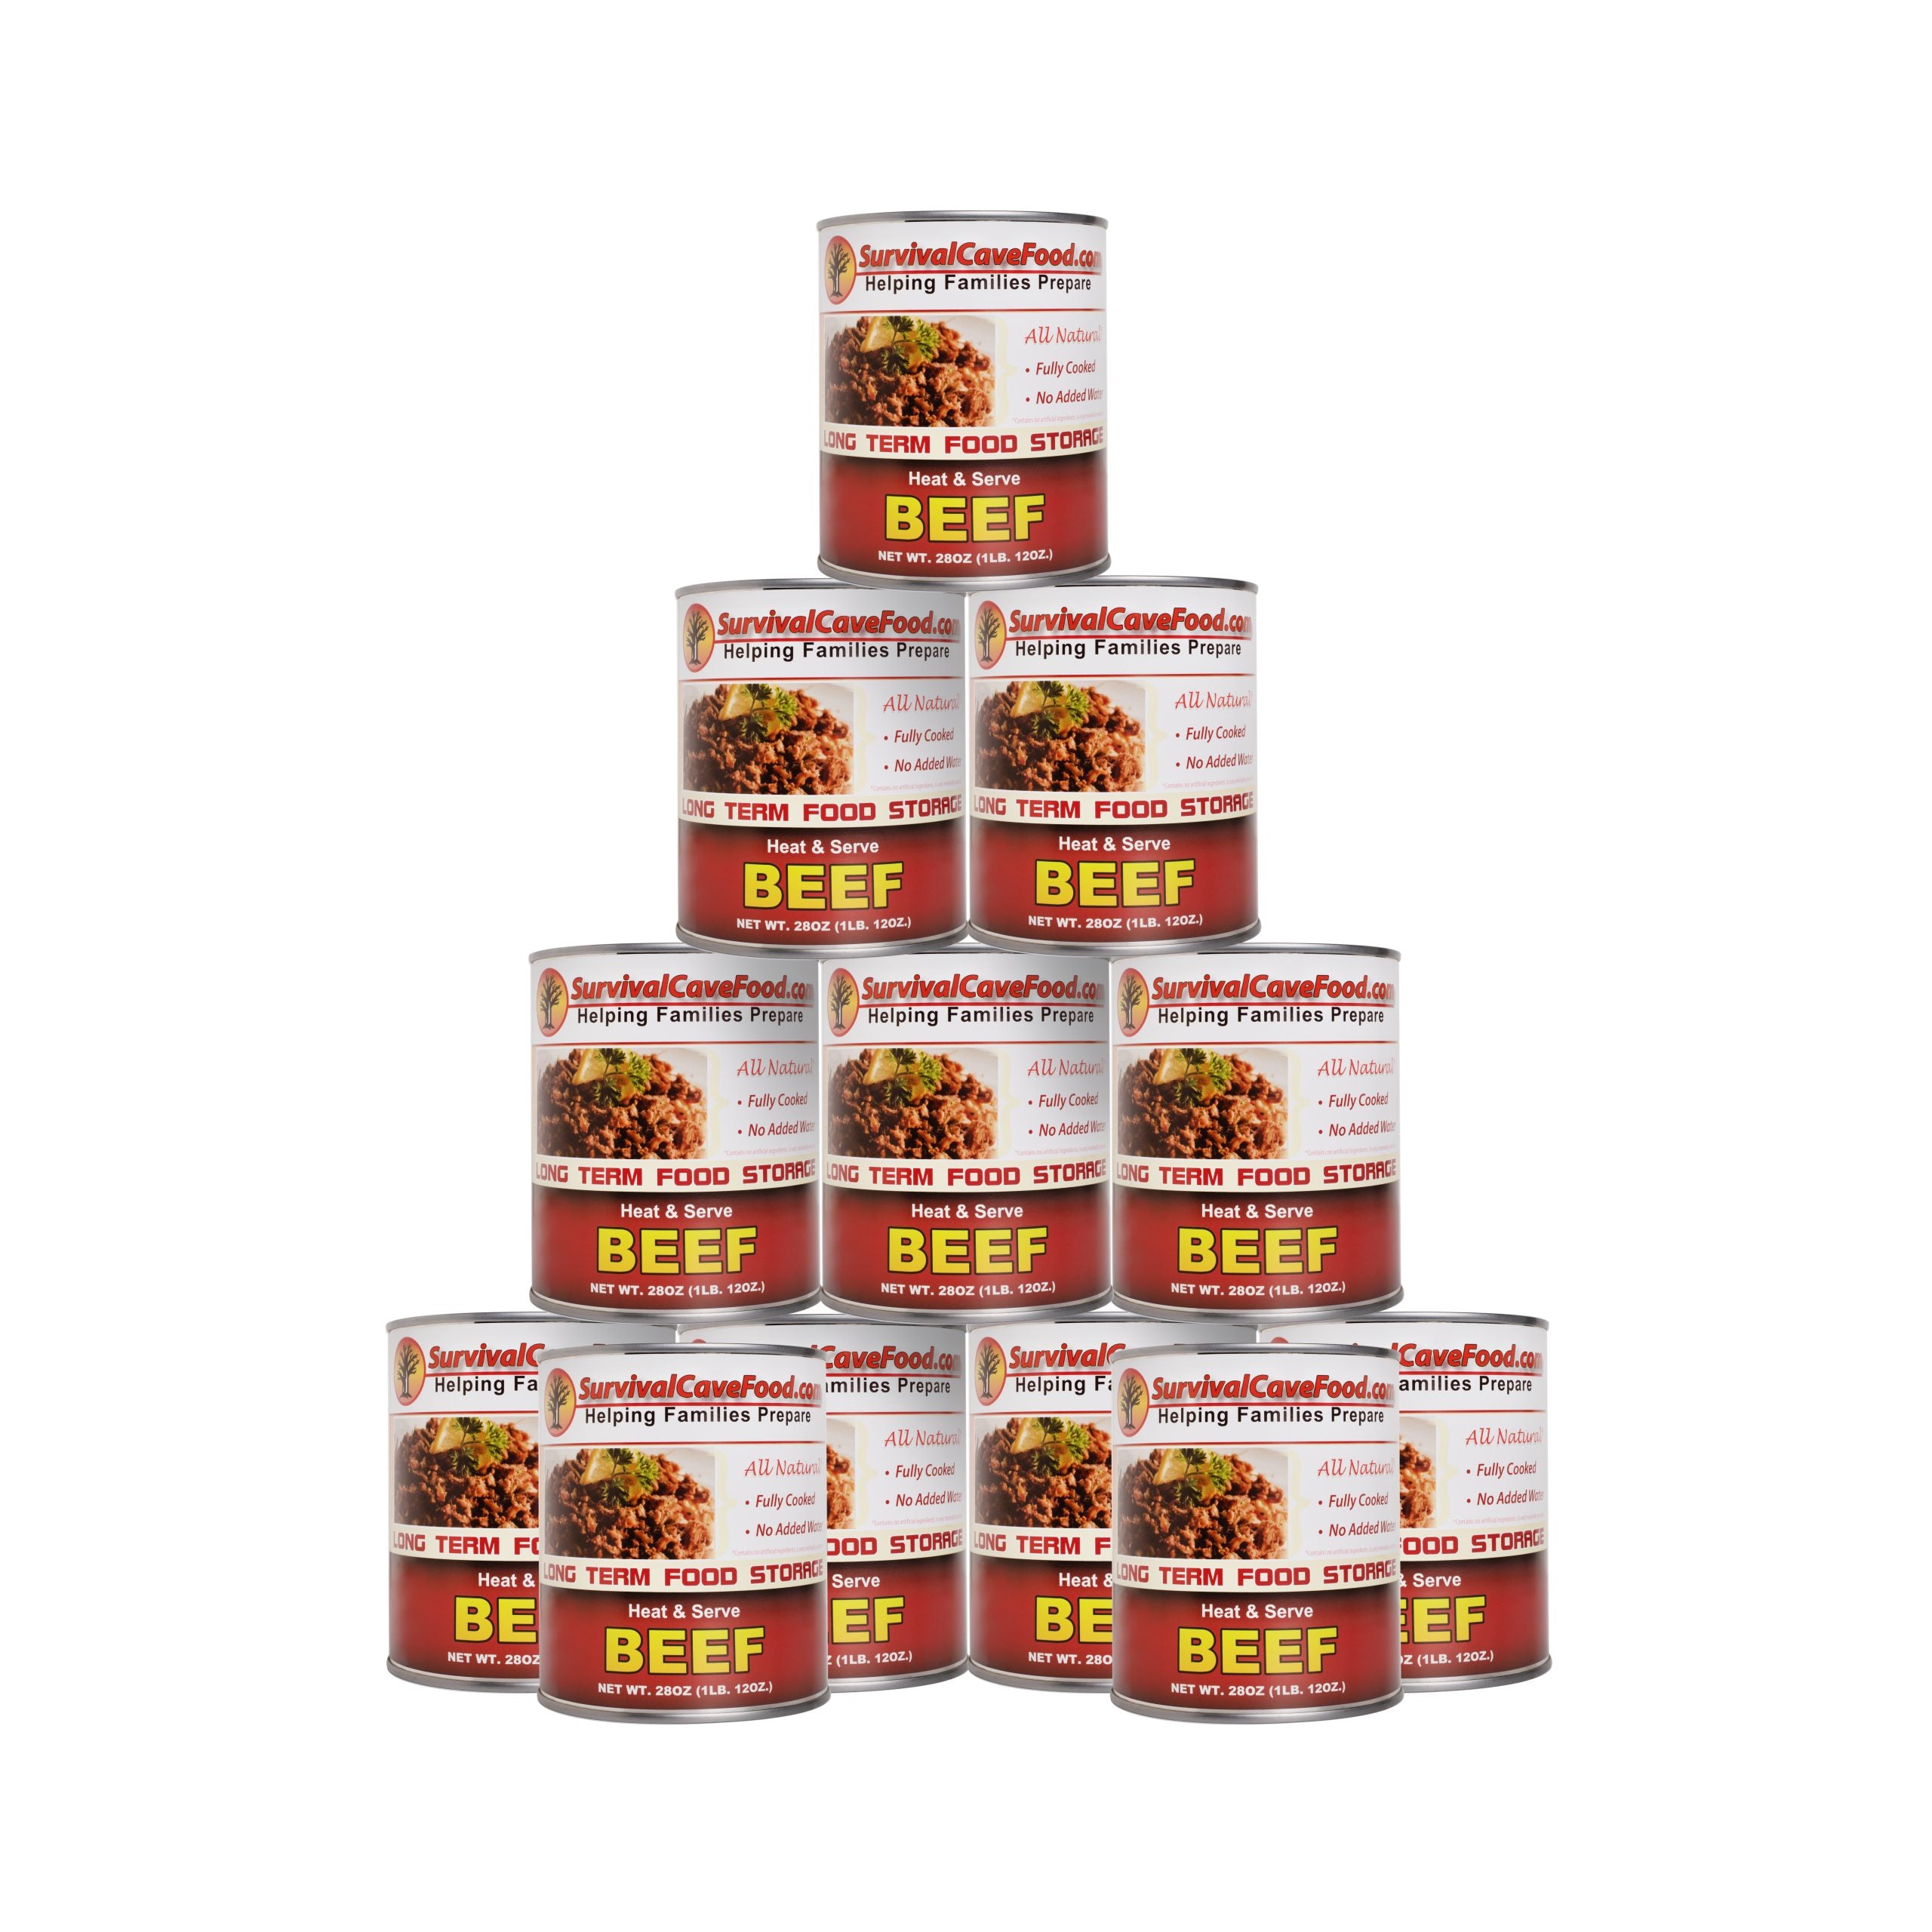 Survival Cave Beef 12 – 28 oz Cans – Ready to Eat Canned Meat